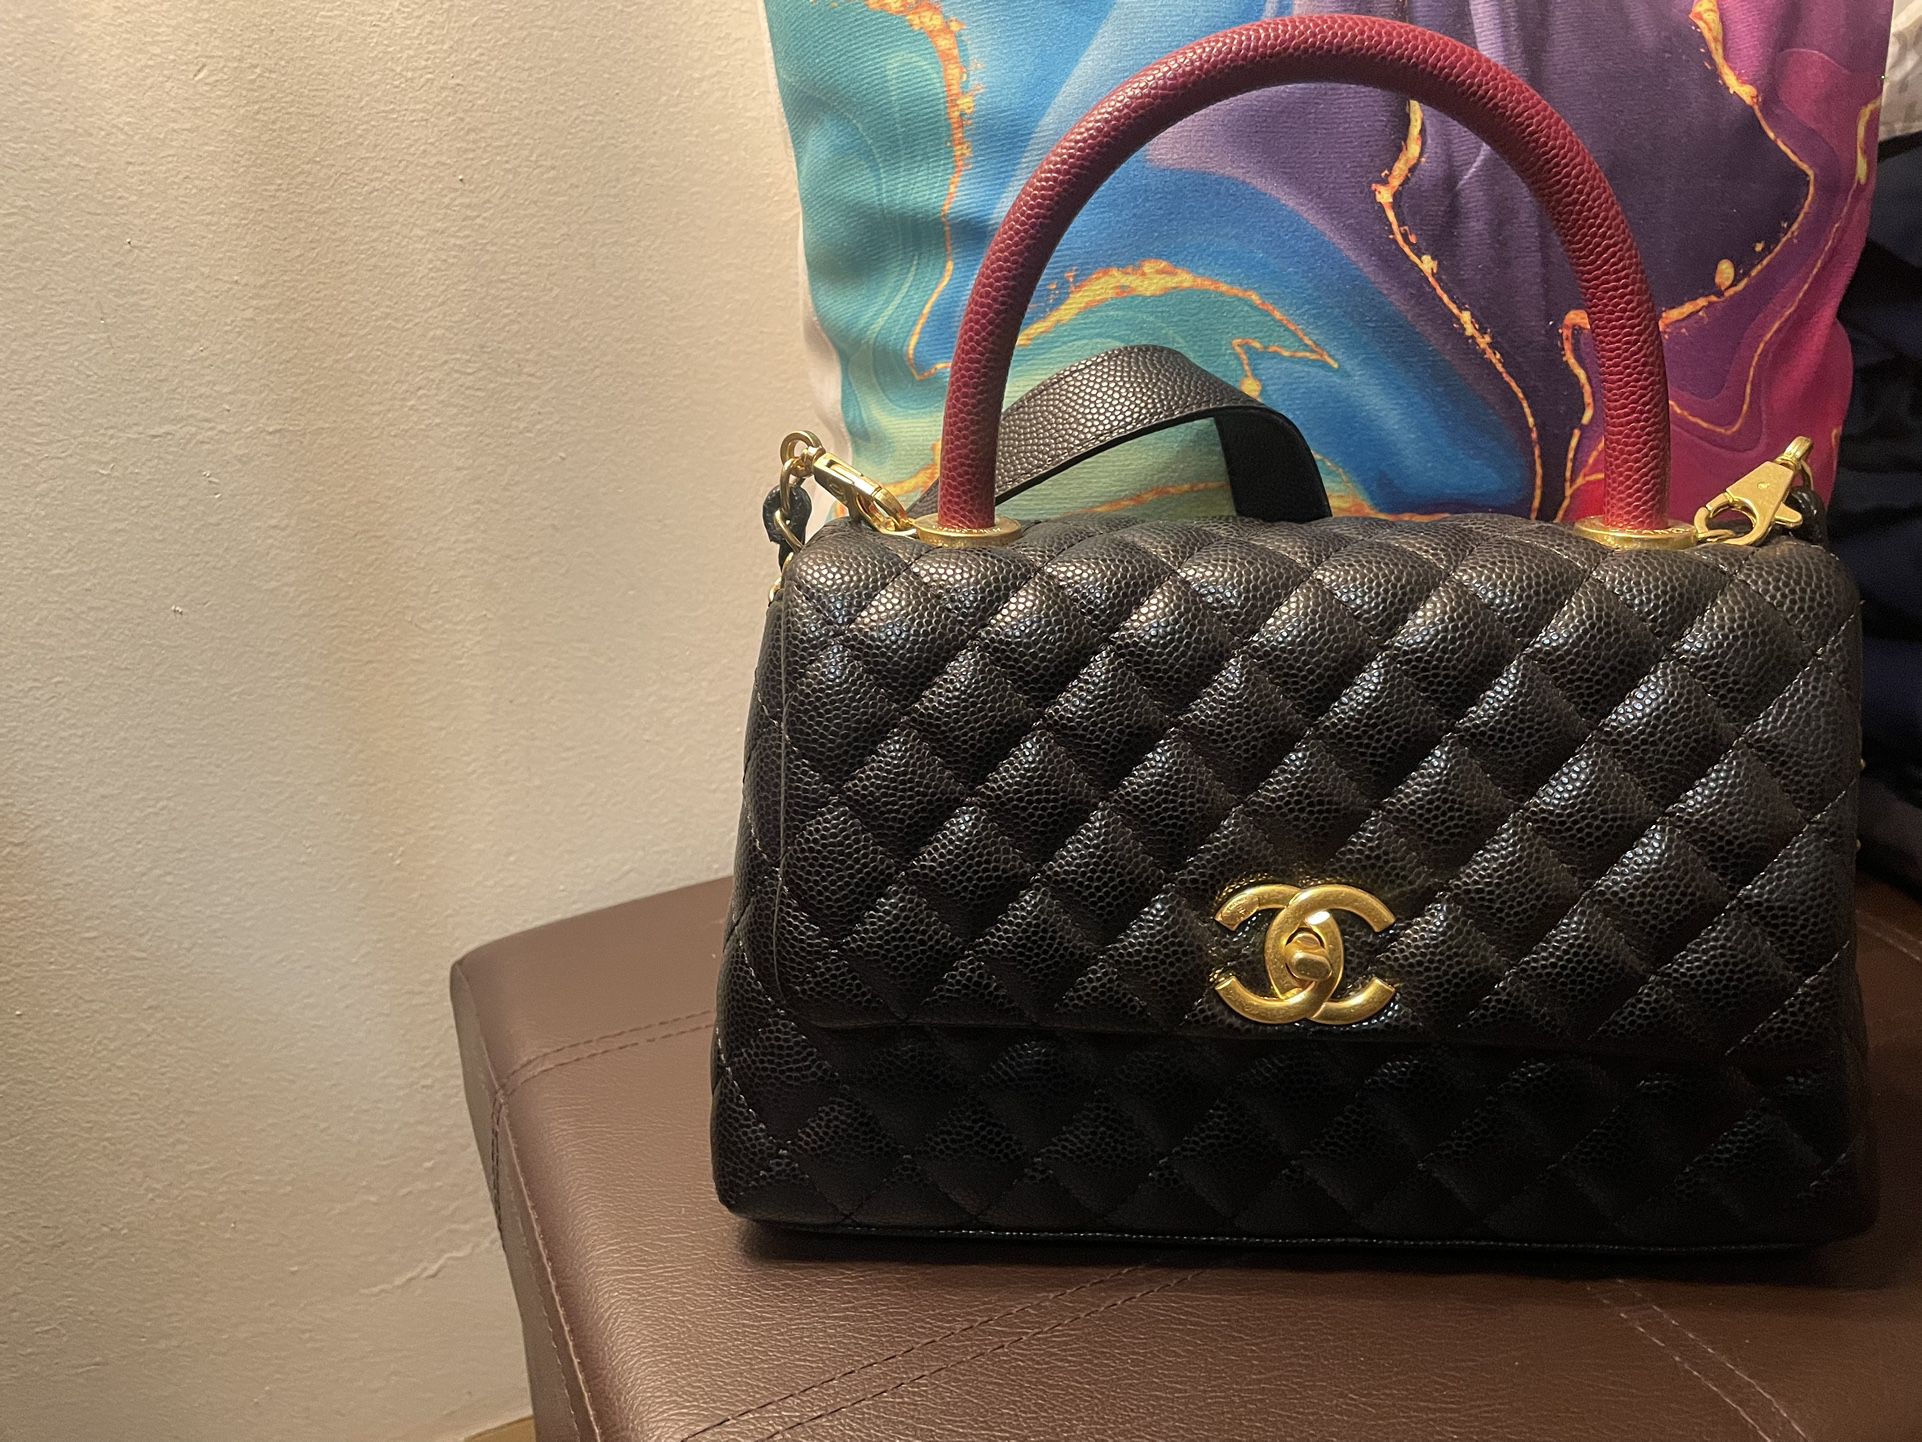 Chanel Bag for Sale in The Bronx, NY - OfferUp